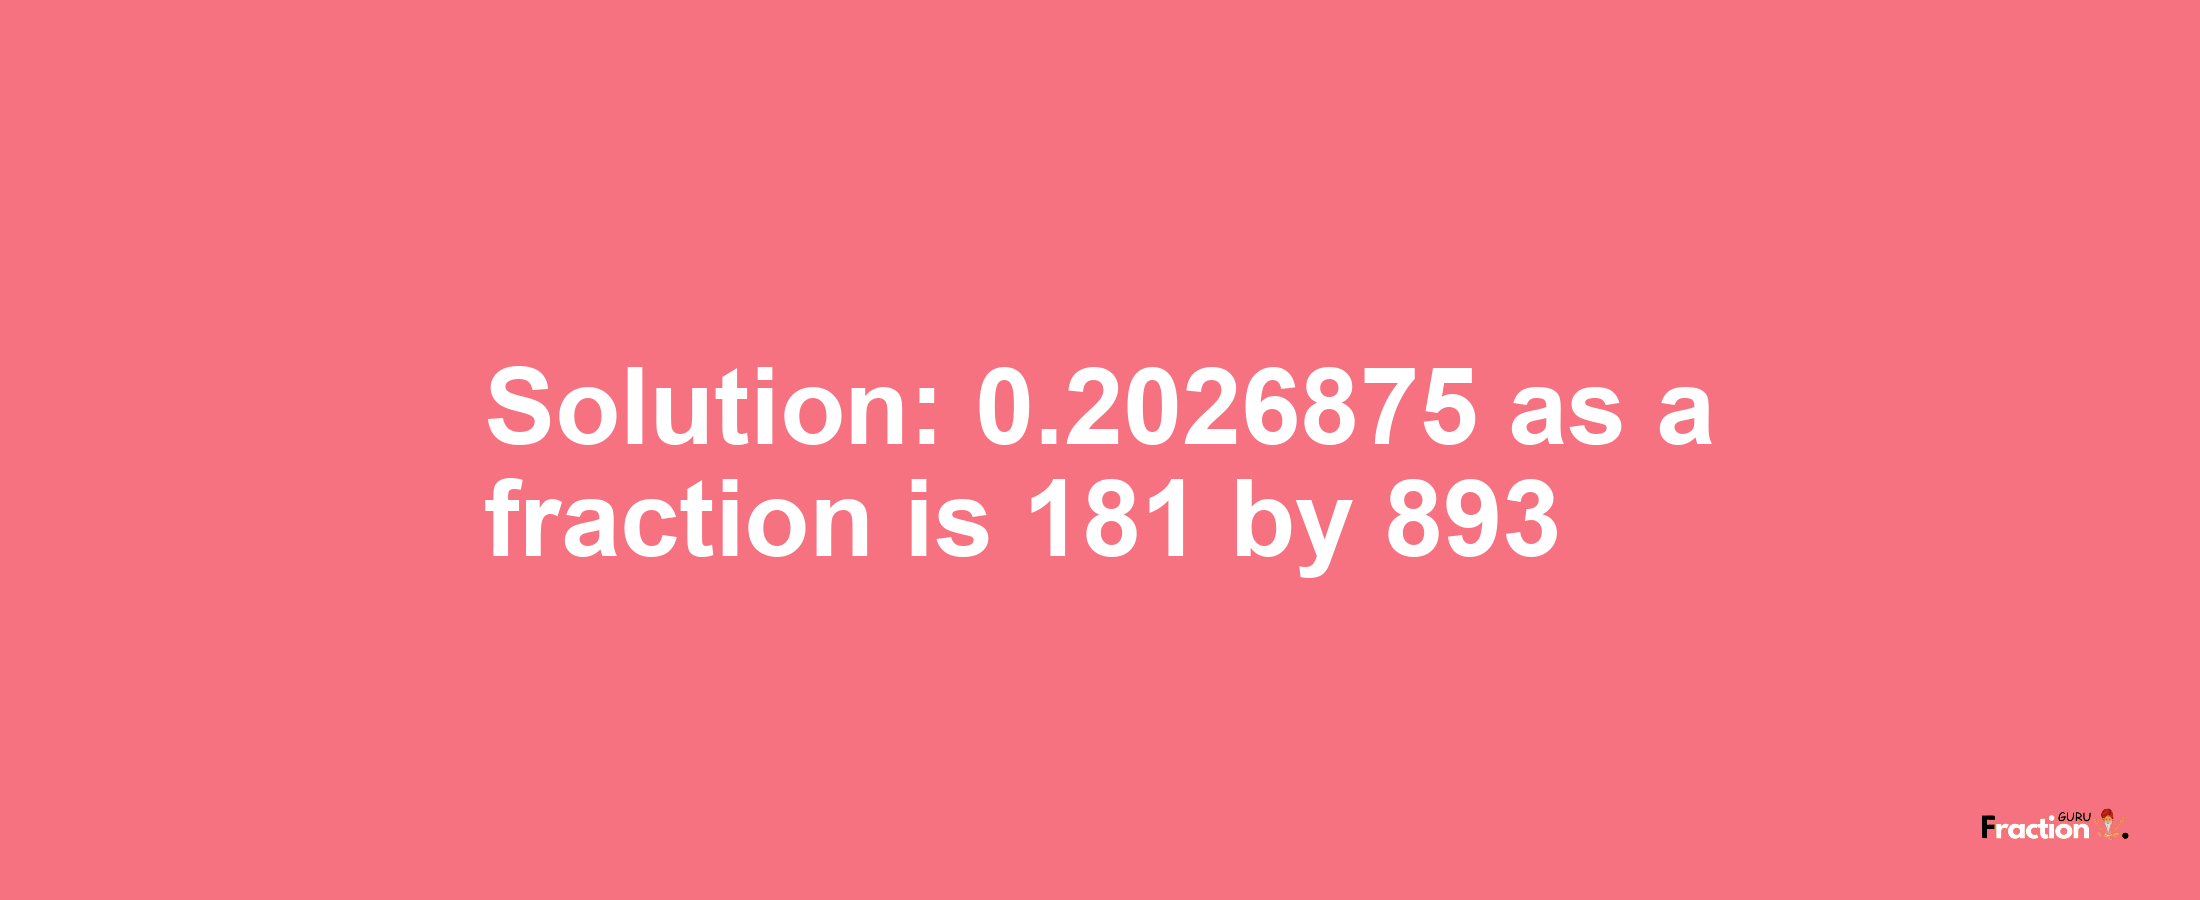 Solution:0.2026875 as a fraction is 181/893